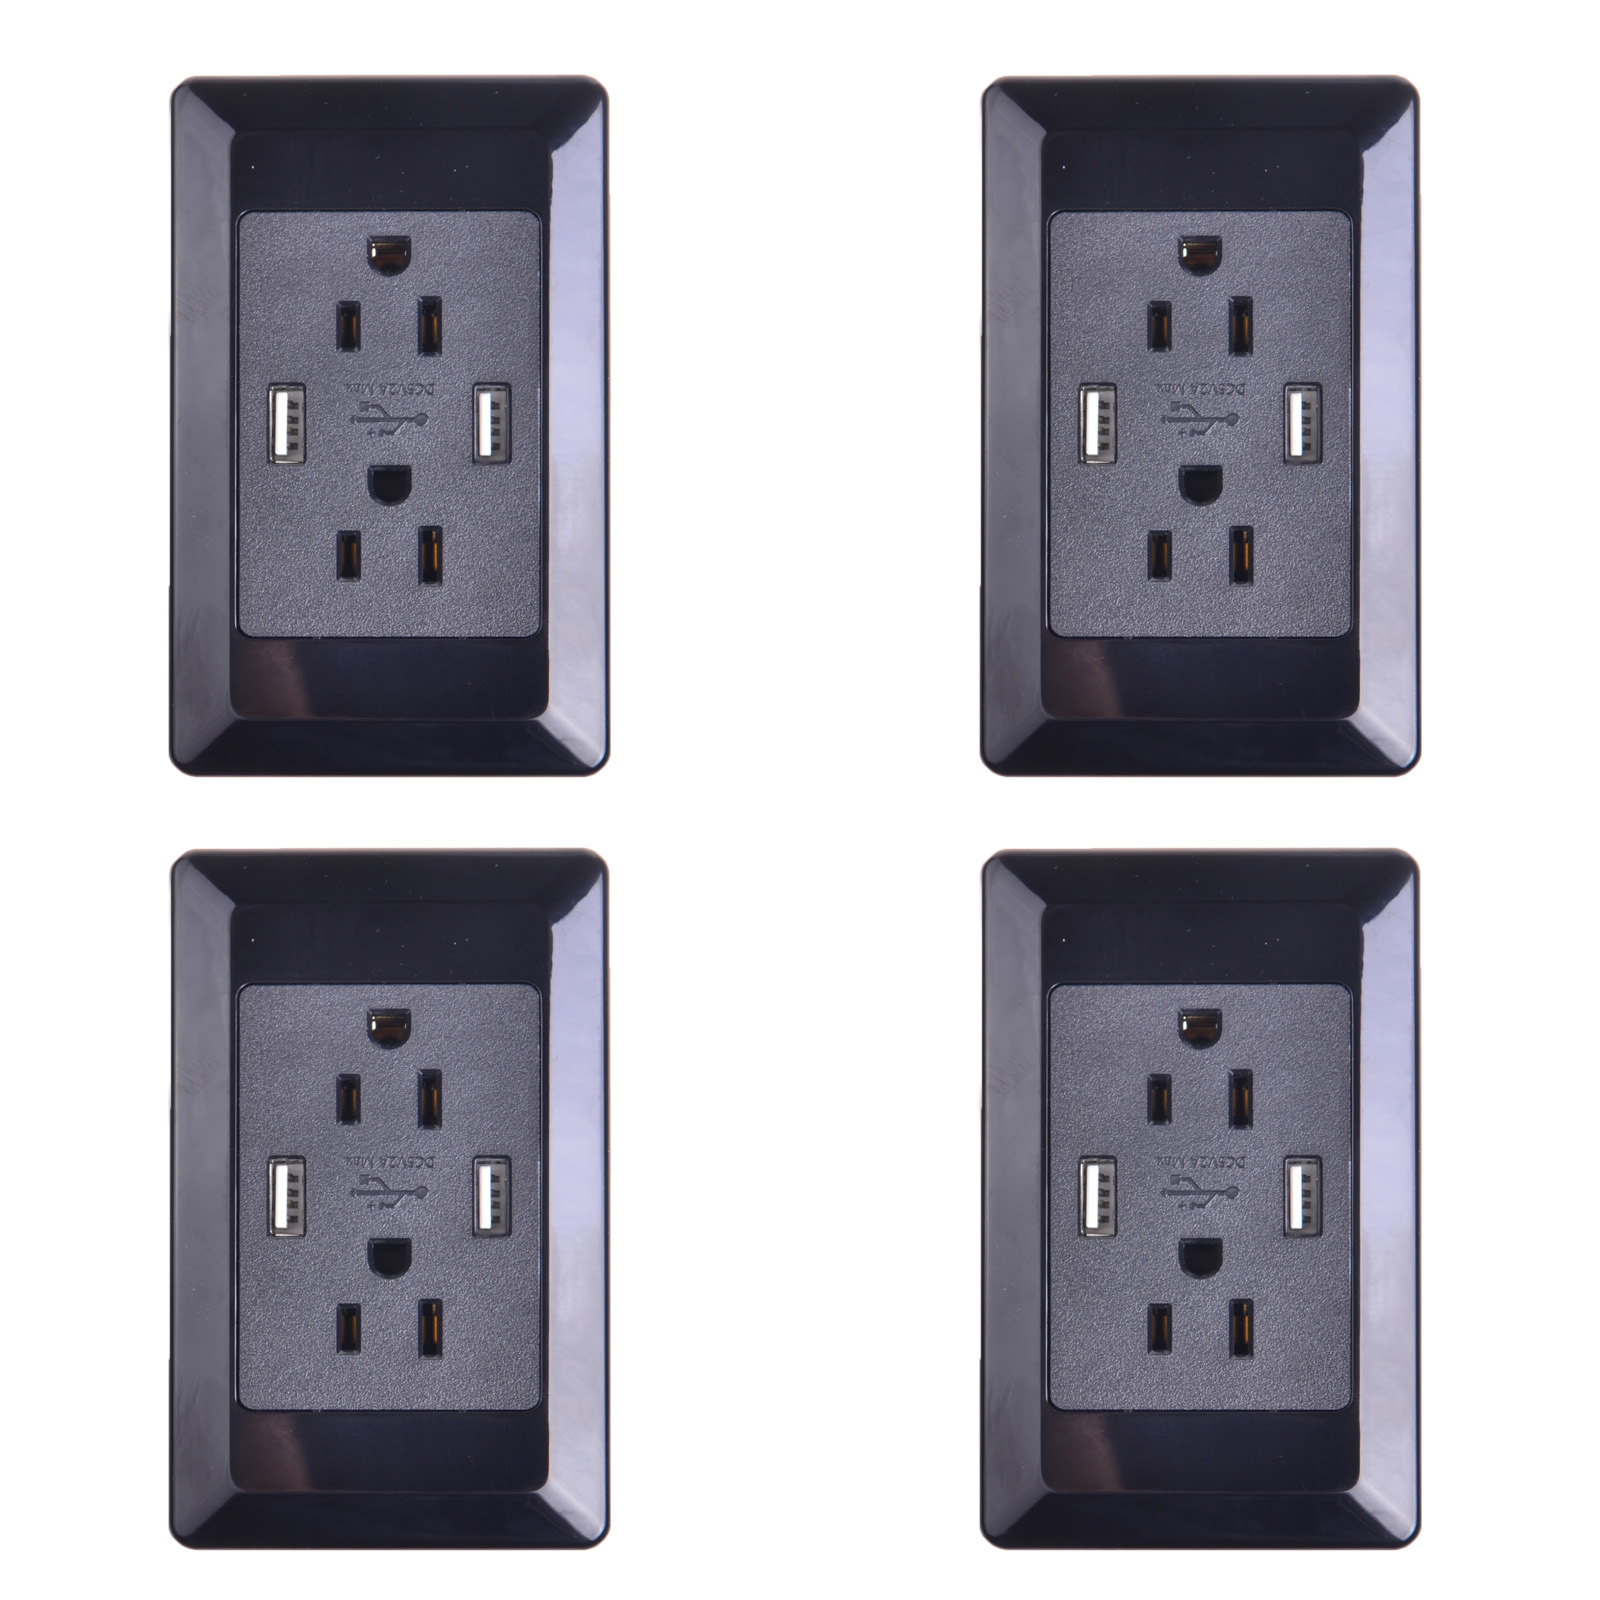 GREENCYCLE 4PK 2A 5V Dual USB Port Electric Wall Charger AC Power Outlet Panel Plate Dock Station Socket Duplex Receptacle Black